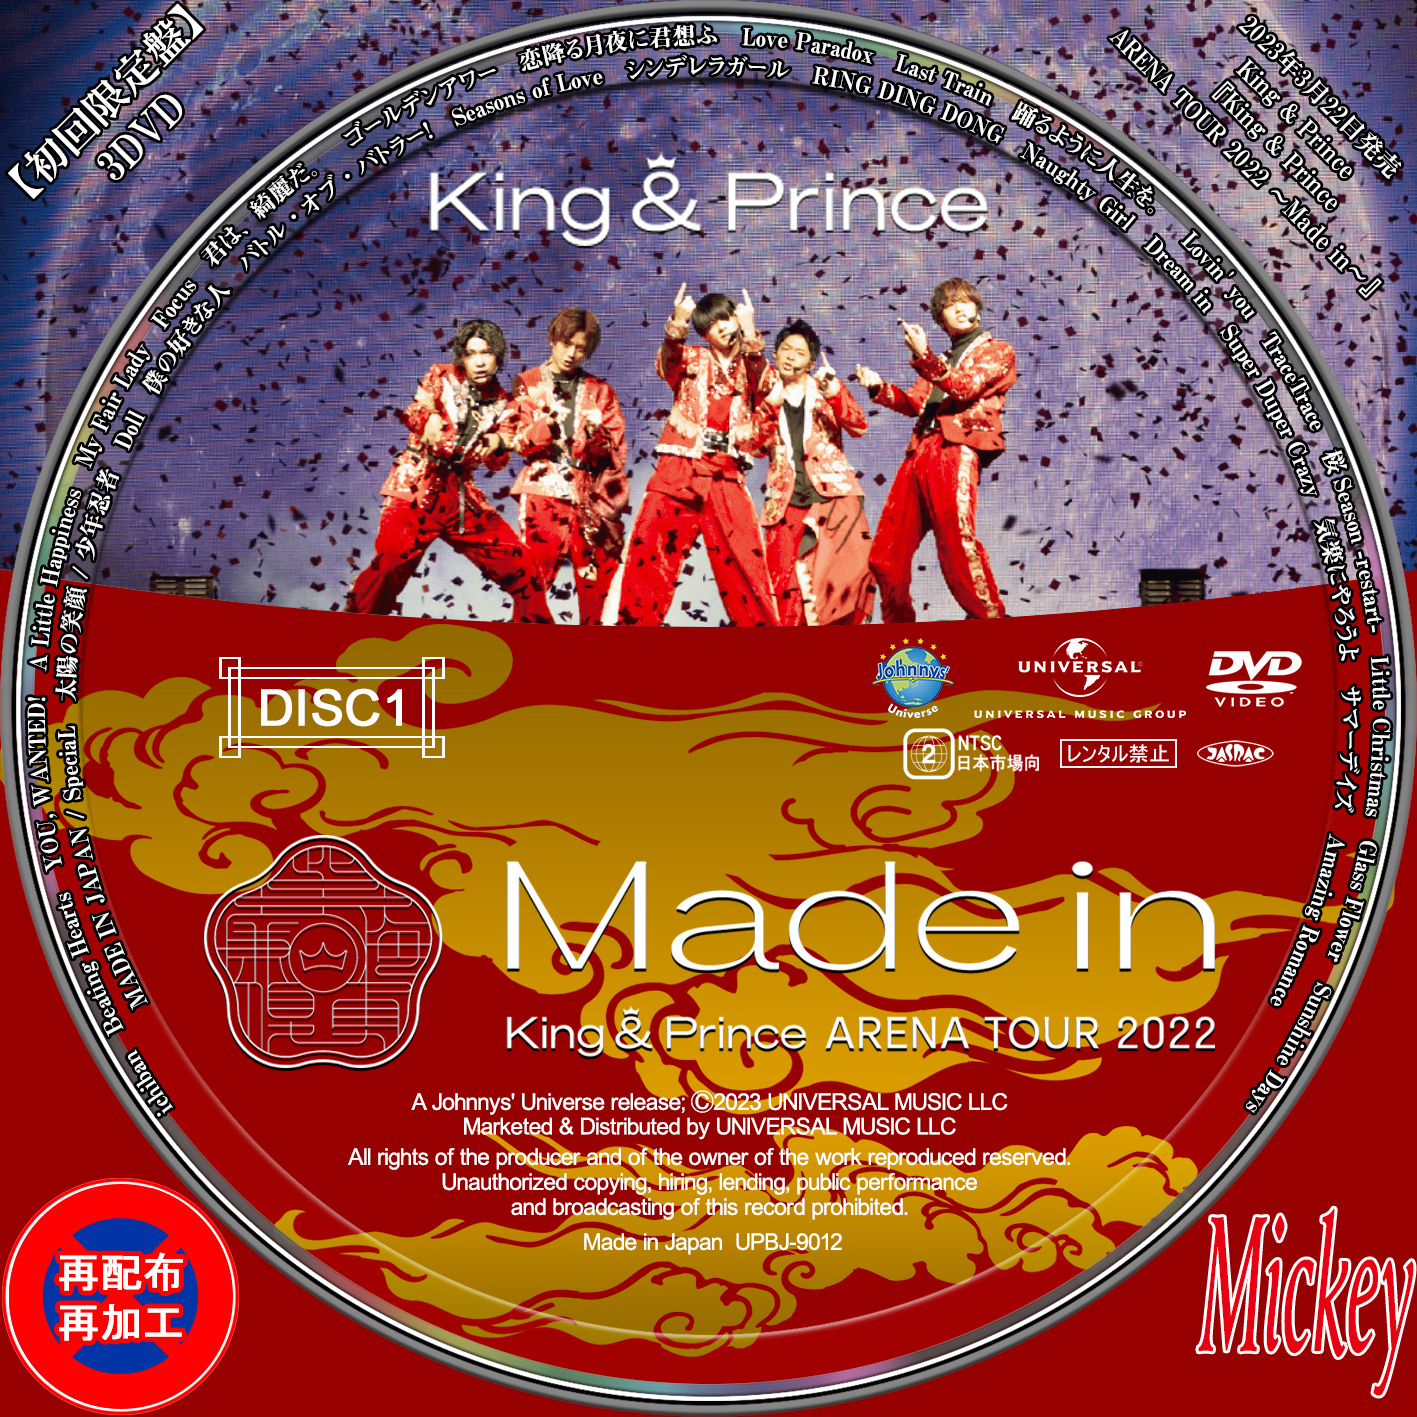 King ＆ Prince ARENA TOUR 2022 ~Made in~